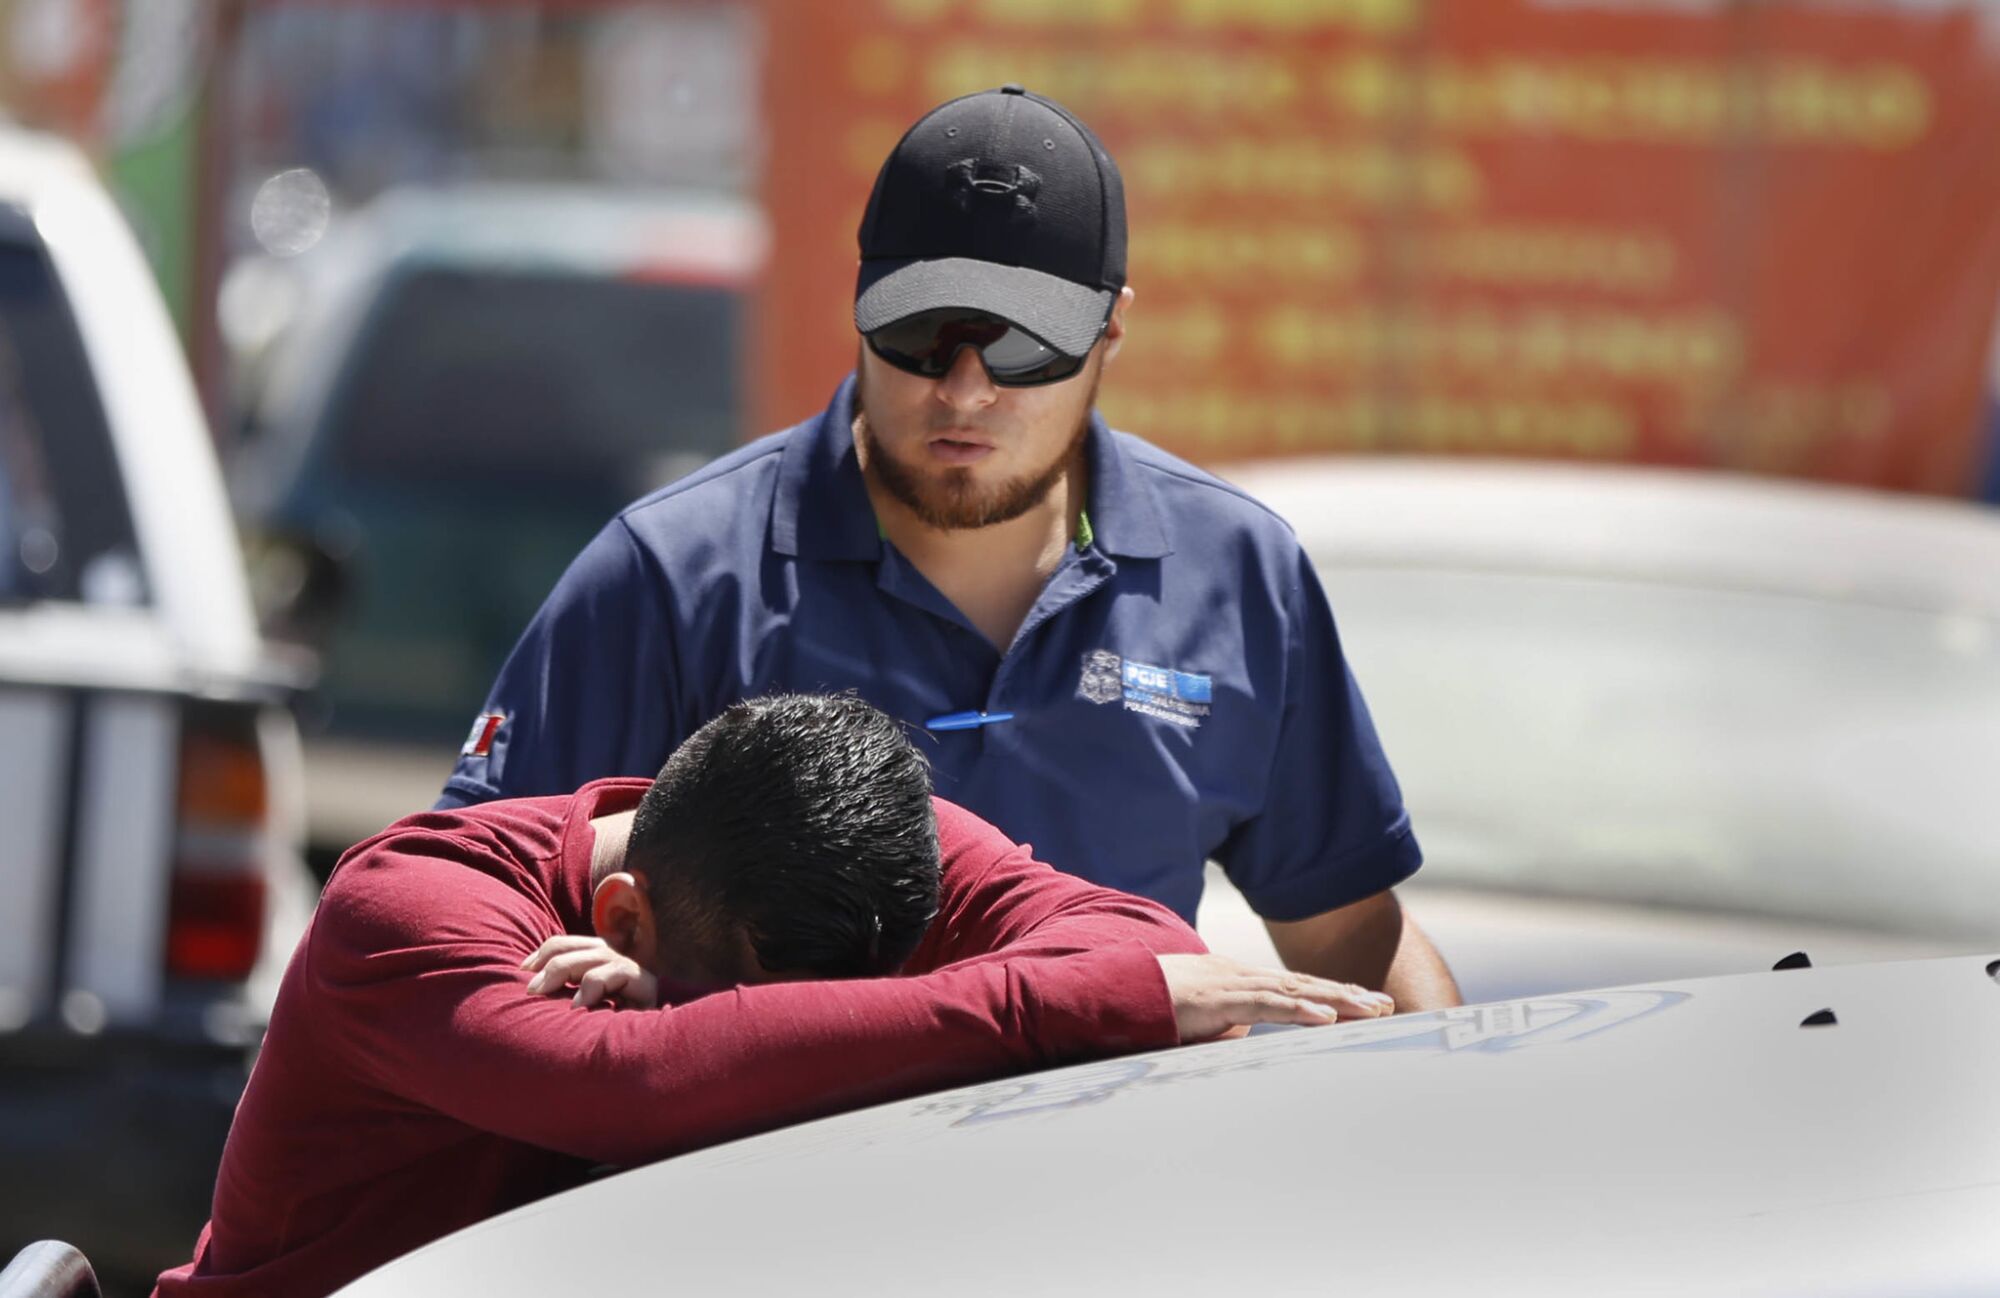 The son of a street vendor in the Buena Vista section of Tijuana cries on the hood of a police car 